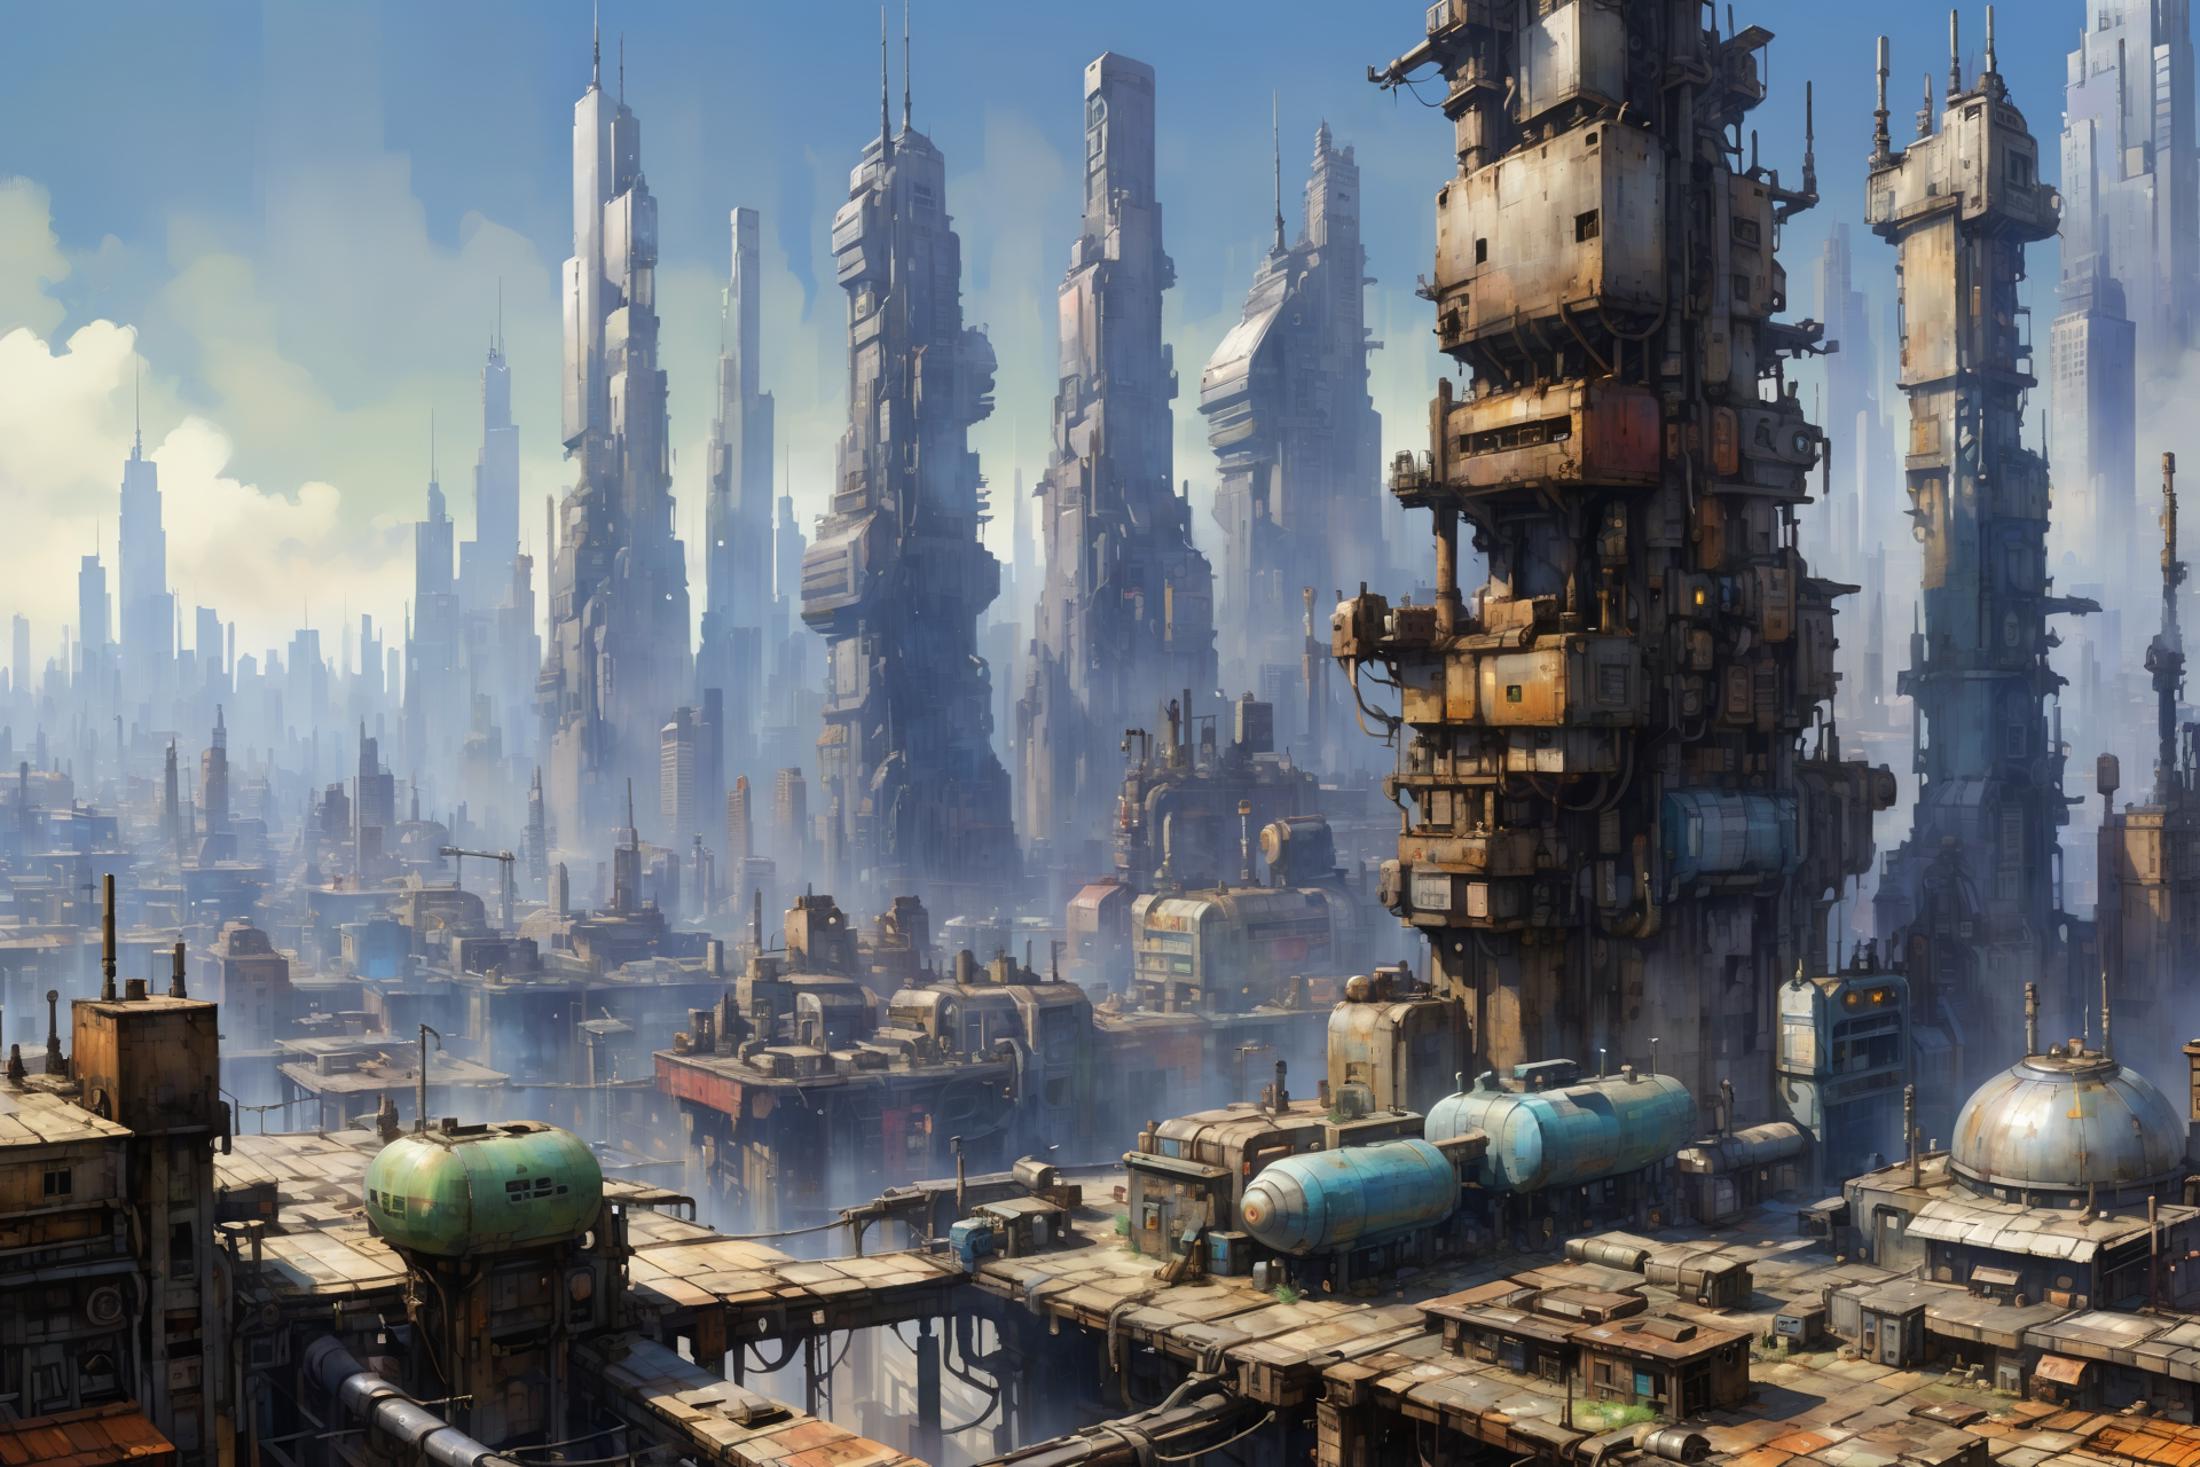 Futuristic city with tall buildings and blue tanks.